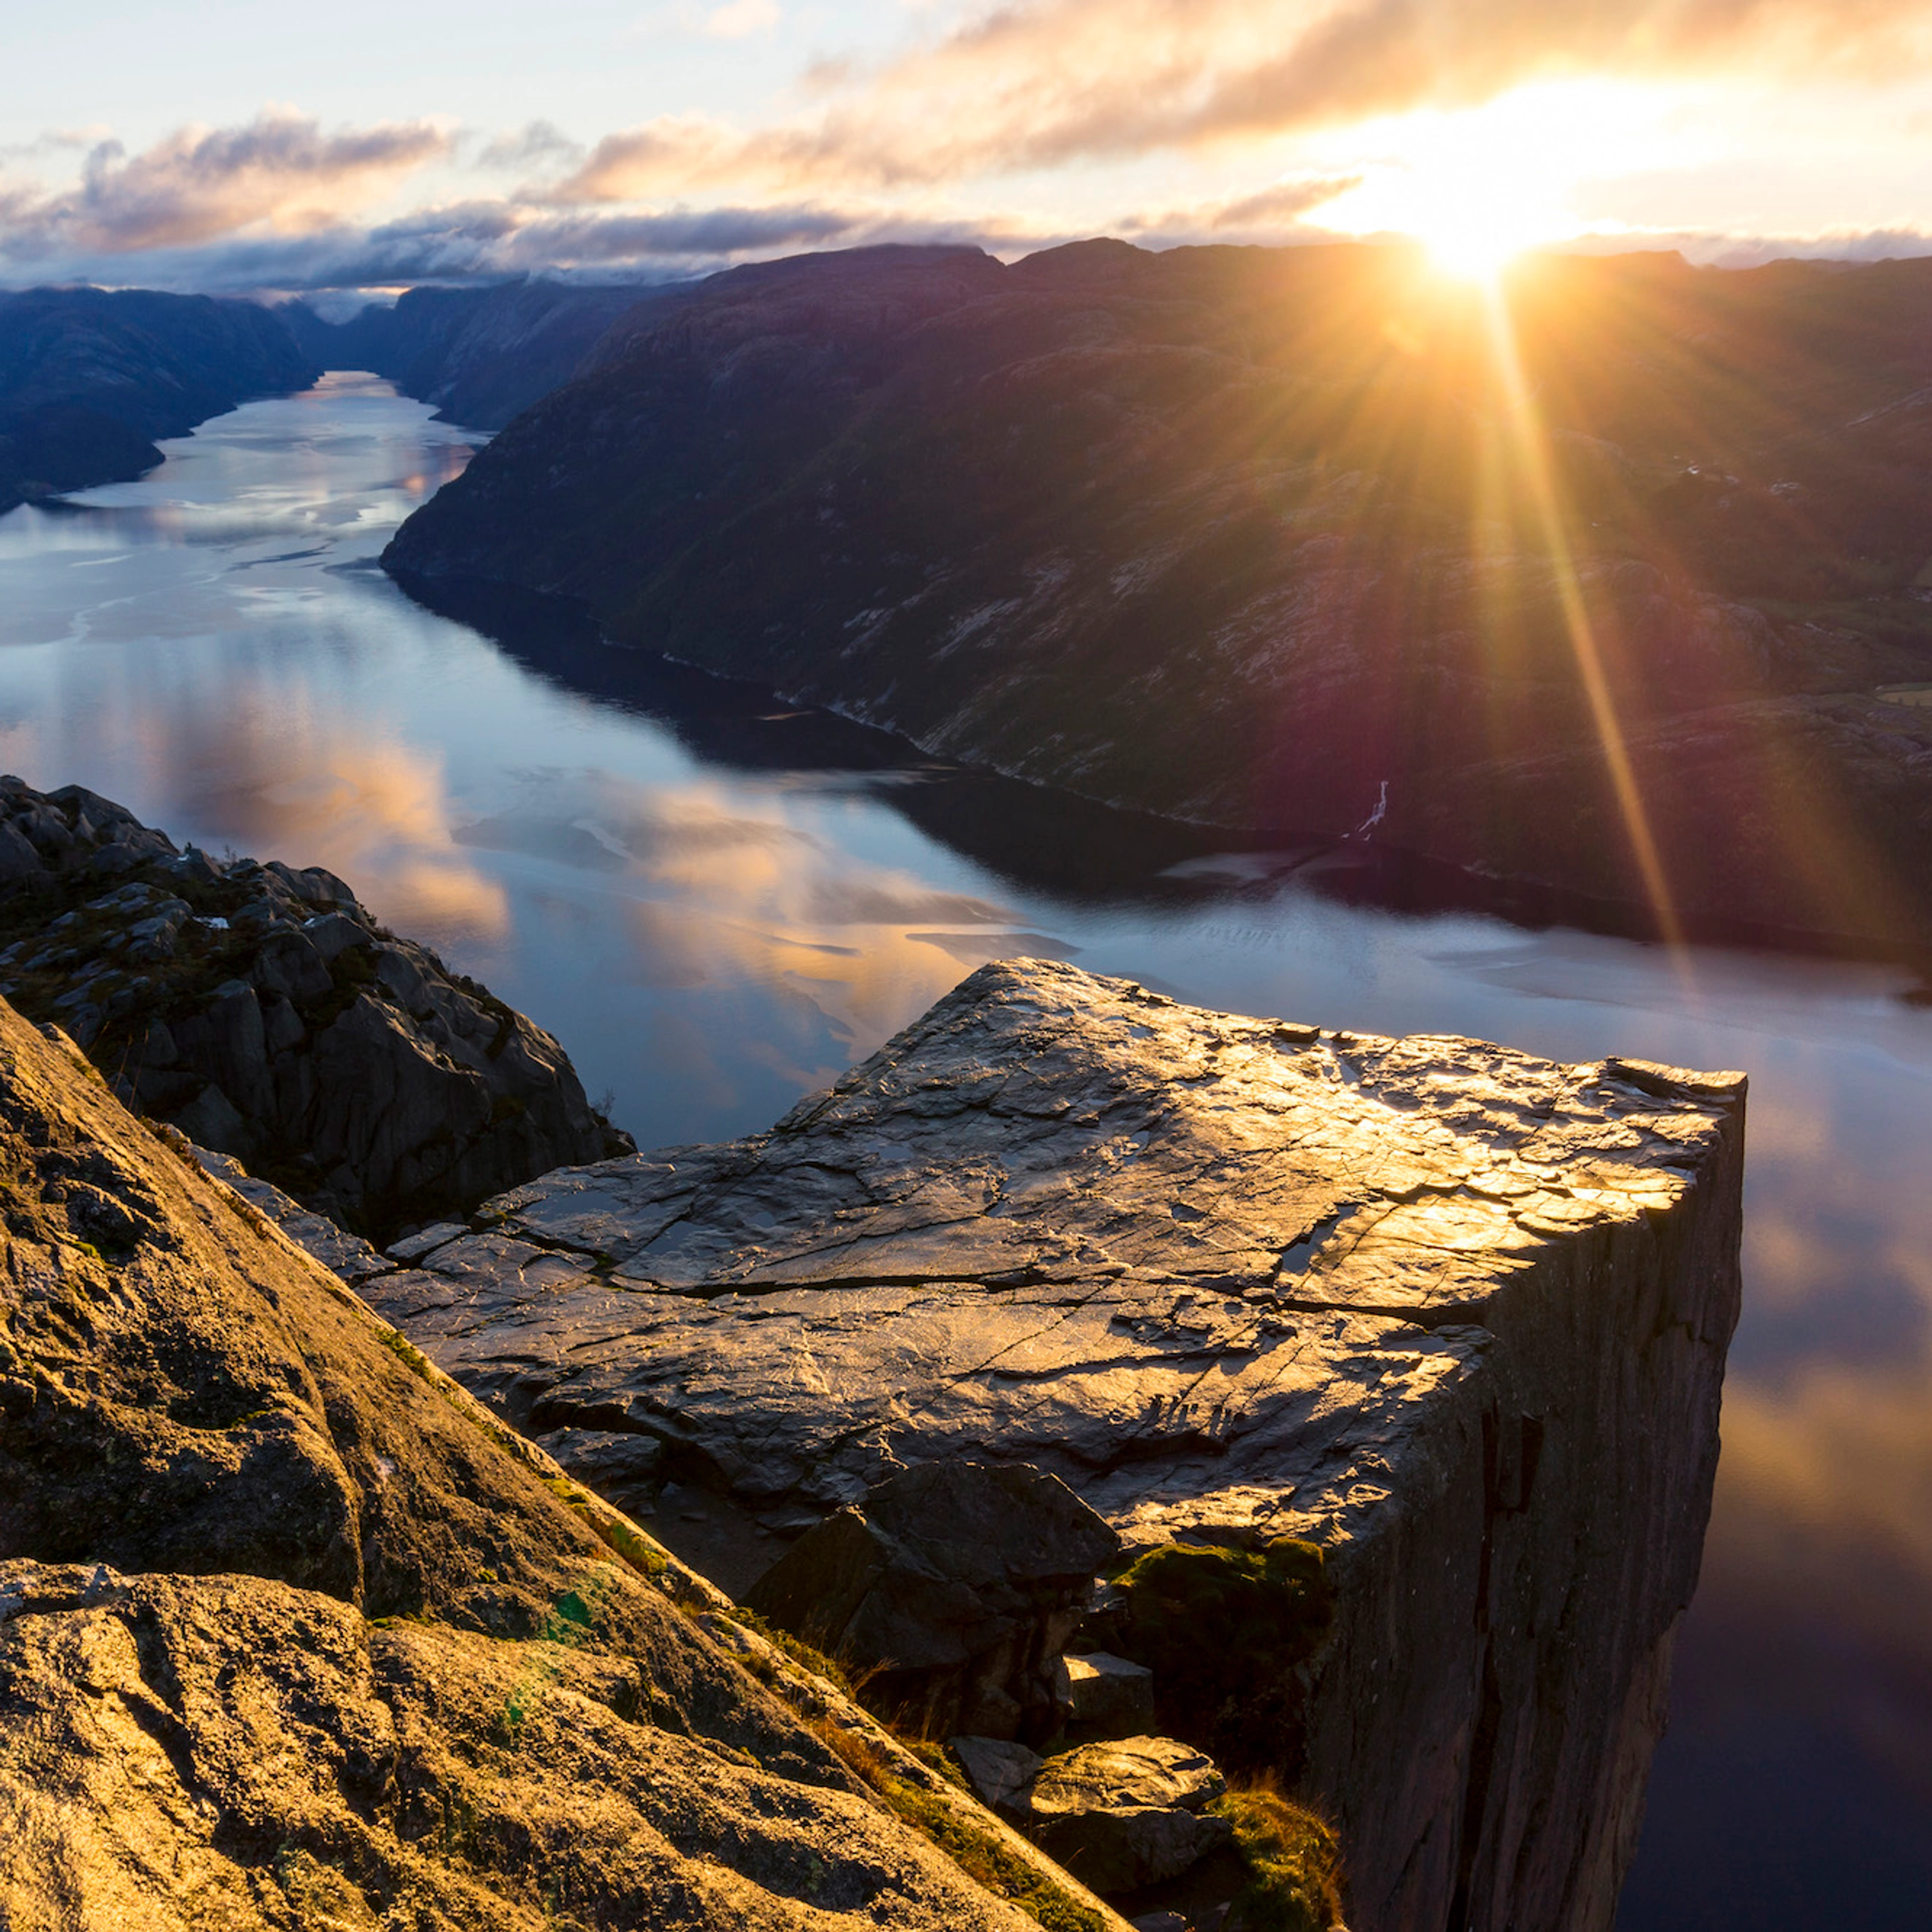 Sunrise at the Pulpit Rock - Stavanger, The Lysefjord, Norway